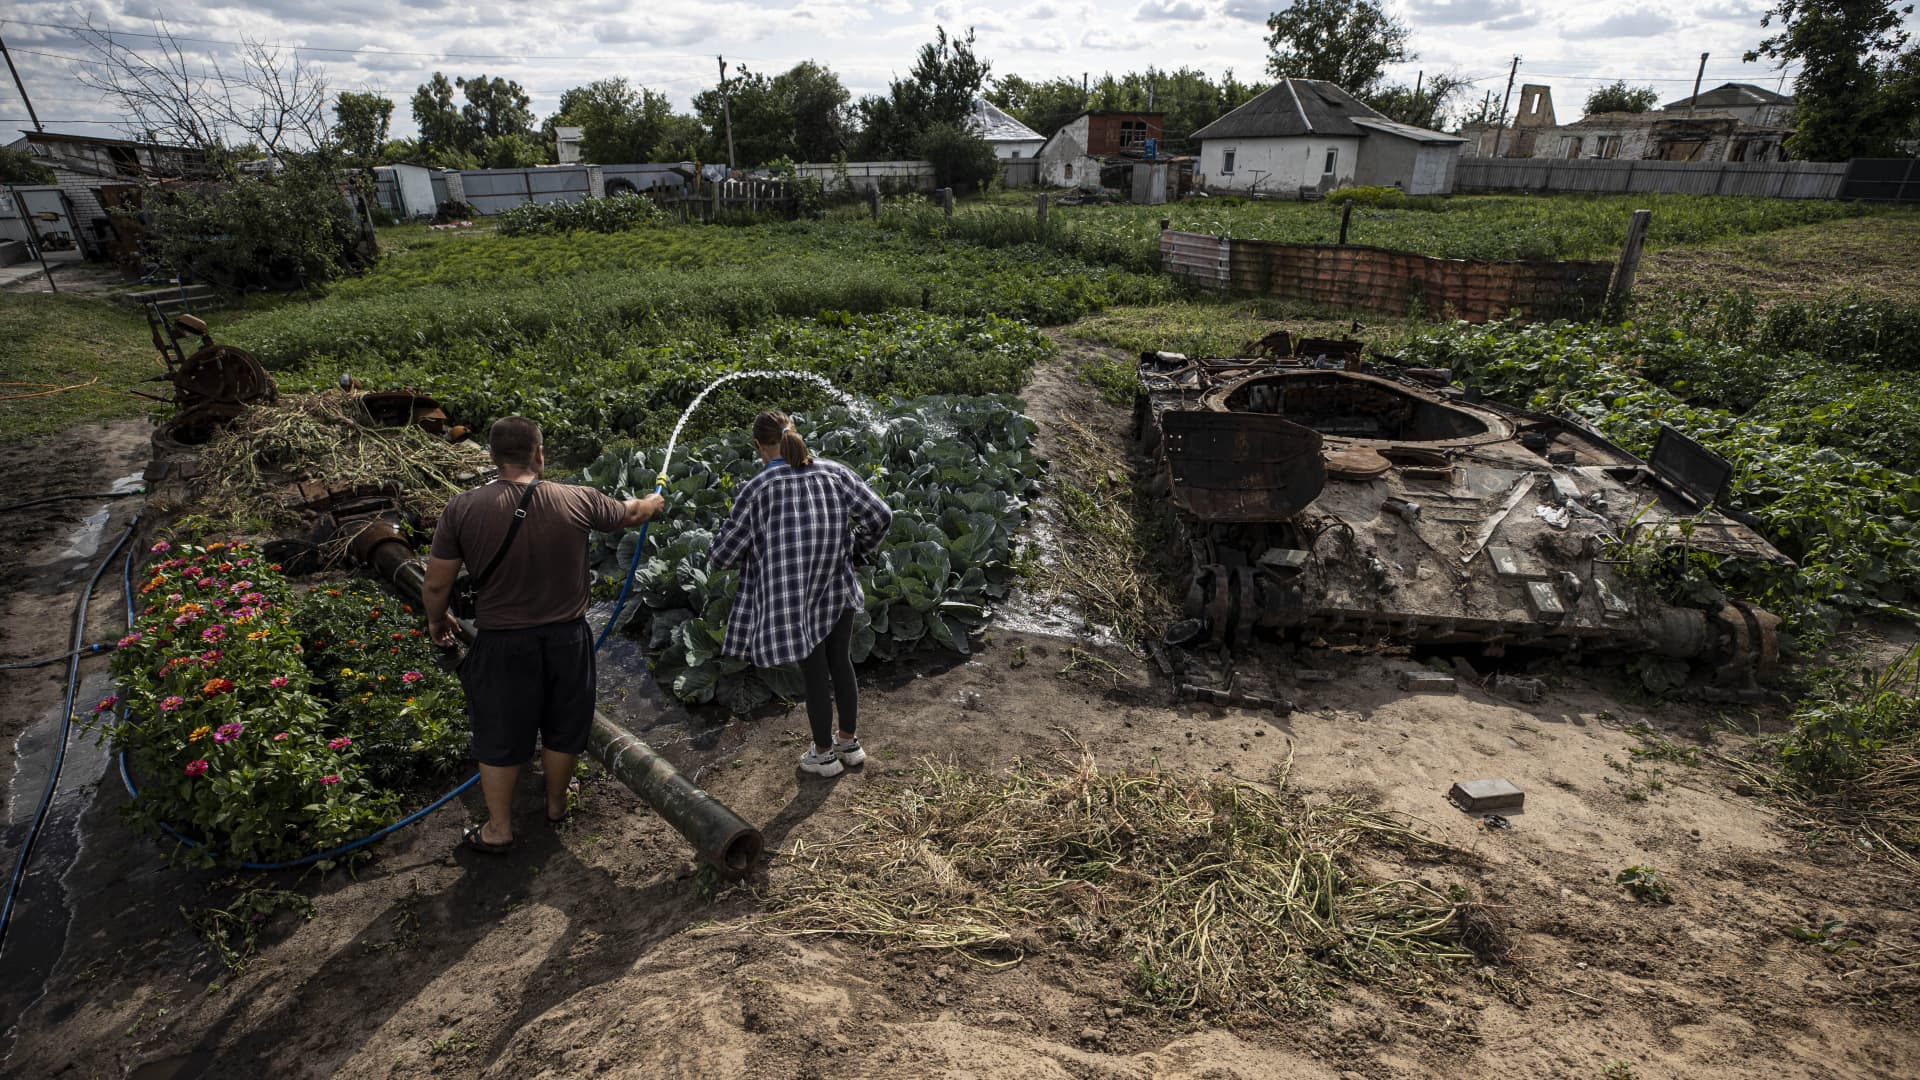 A family grows vegetables in their garden where the wreckage of the tank belonging to the Russian forces is located, in Velyka Dymerka settlement, Kyiv, Ukraine on July 21, 2022. 